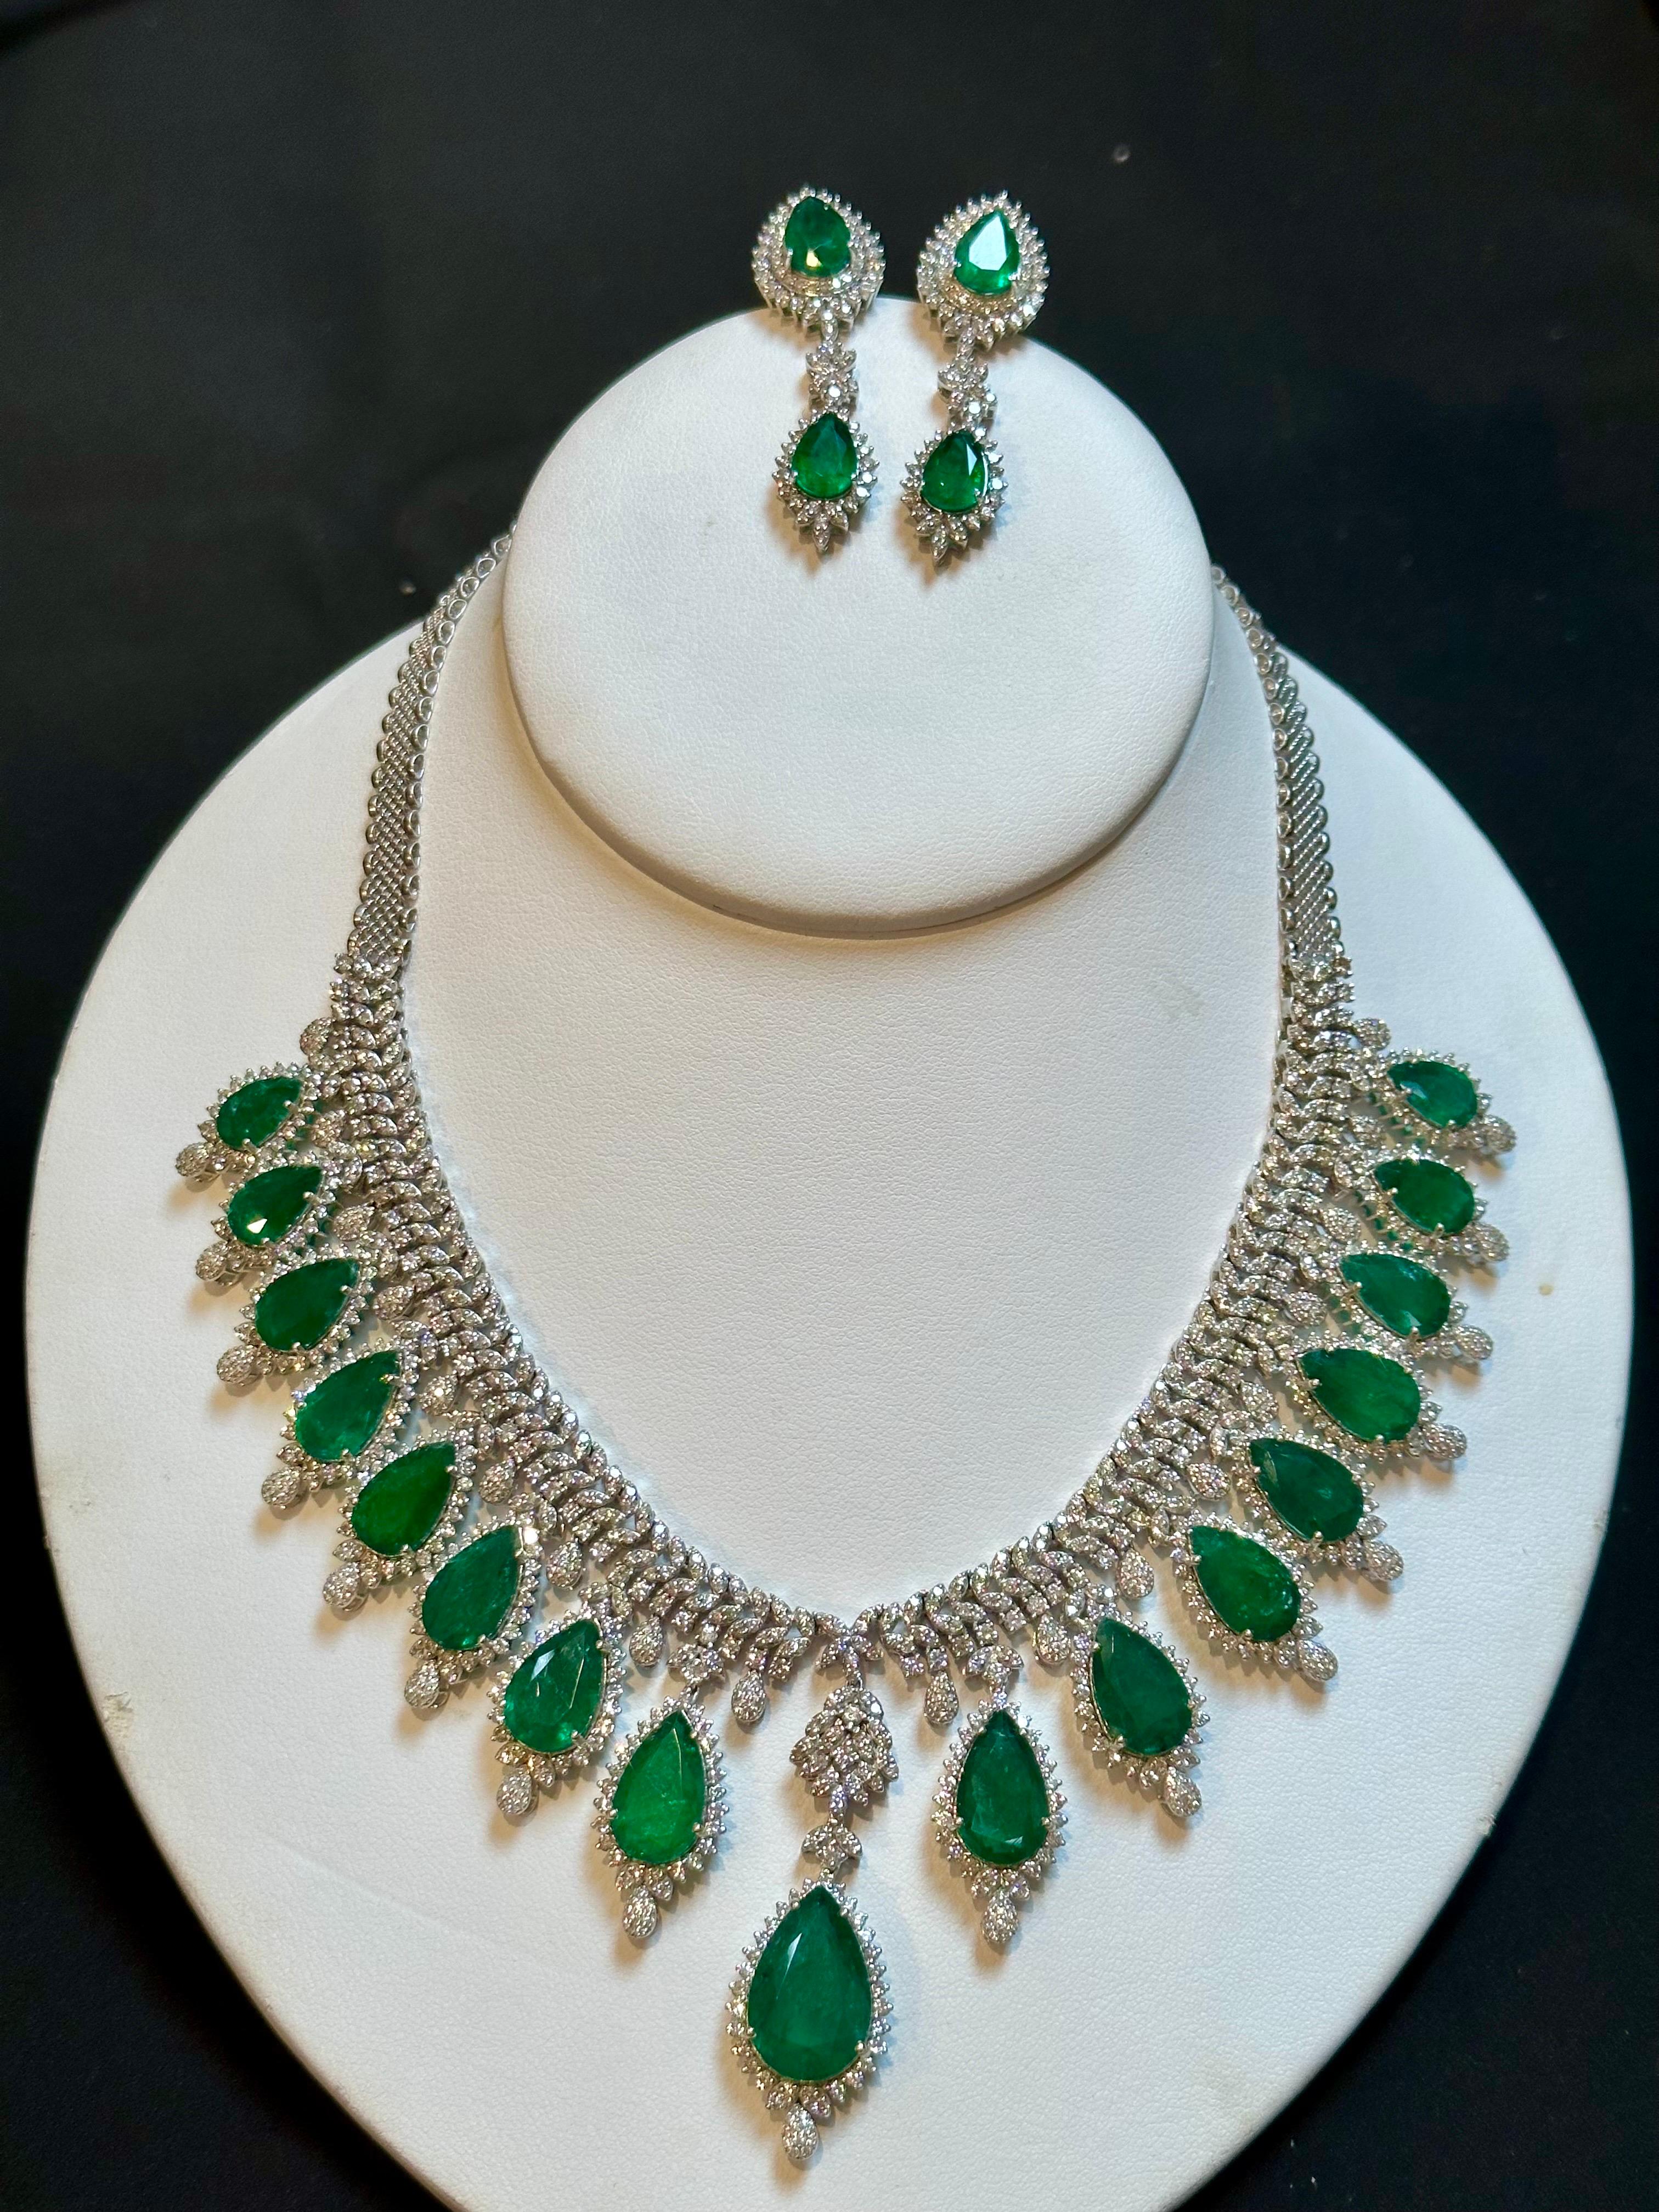 73ct Zambian Emerald and 22ct Diamond Necklace and Earring Bridal Suite For Sale 1